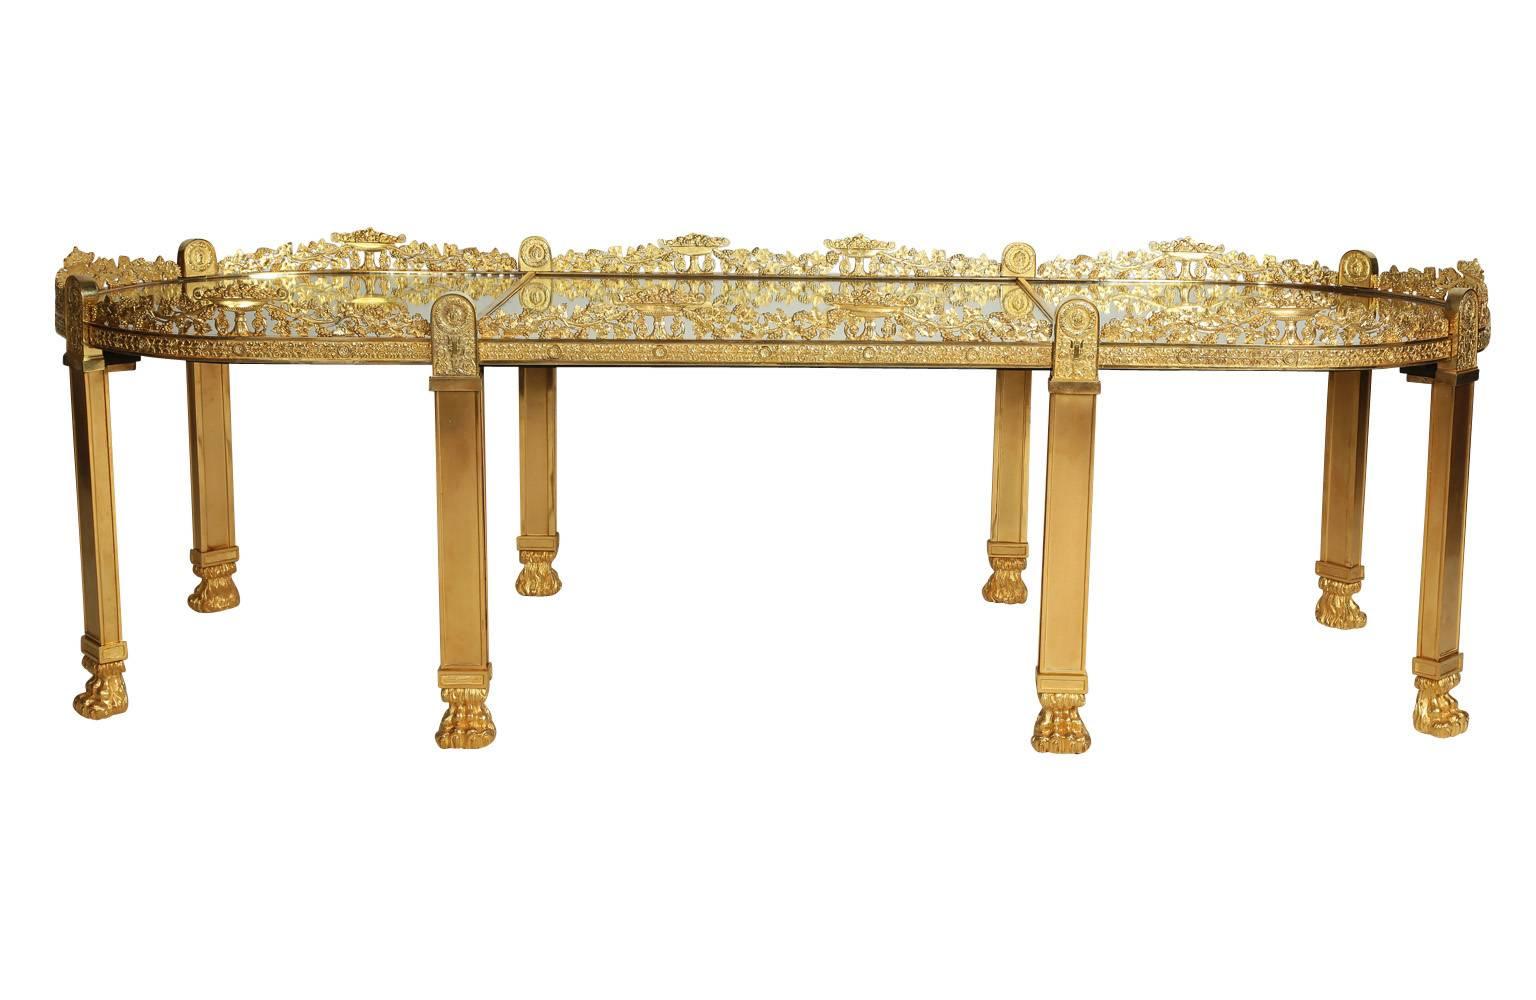 A very fine and large French Empire style Napoleon III gilt bronze Surtout-de-table, now a coffee table with later gilt bronze legs with paw-feet, with a finely chased grape and vine border and mirror plate top, in the manner of Pierre-Philippe